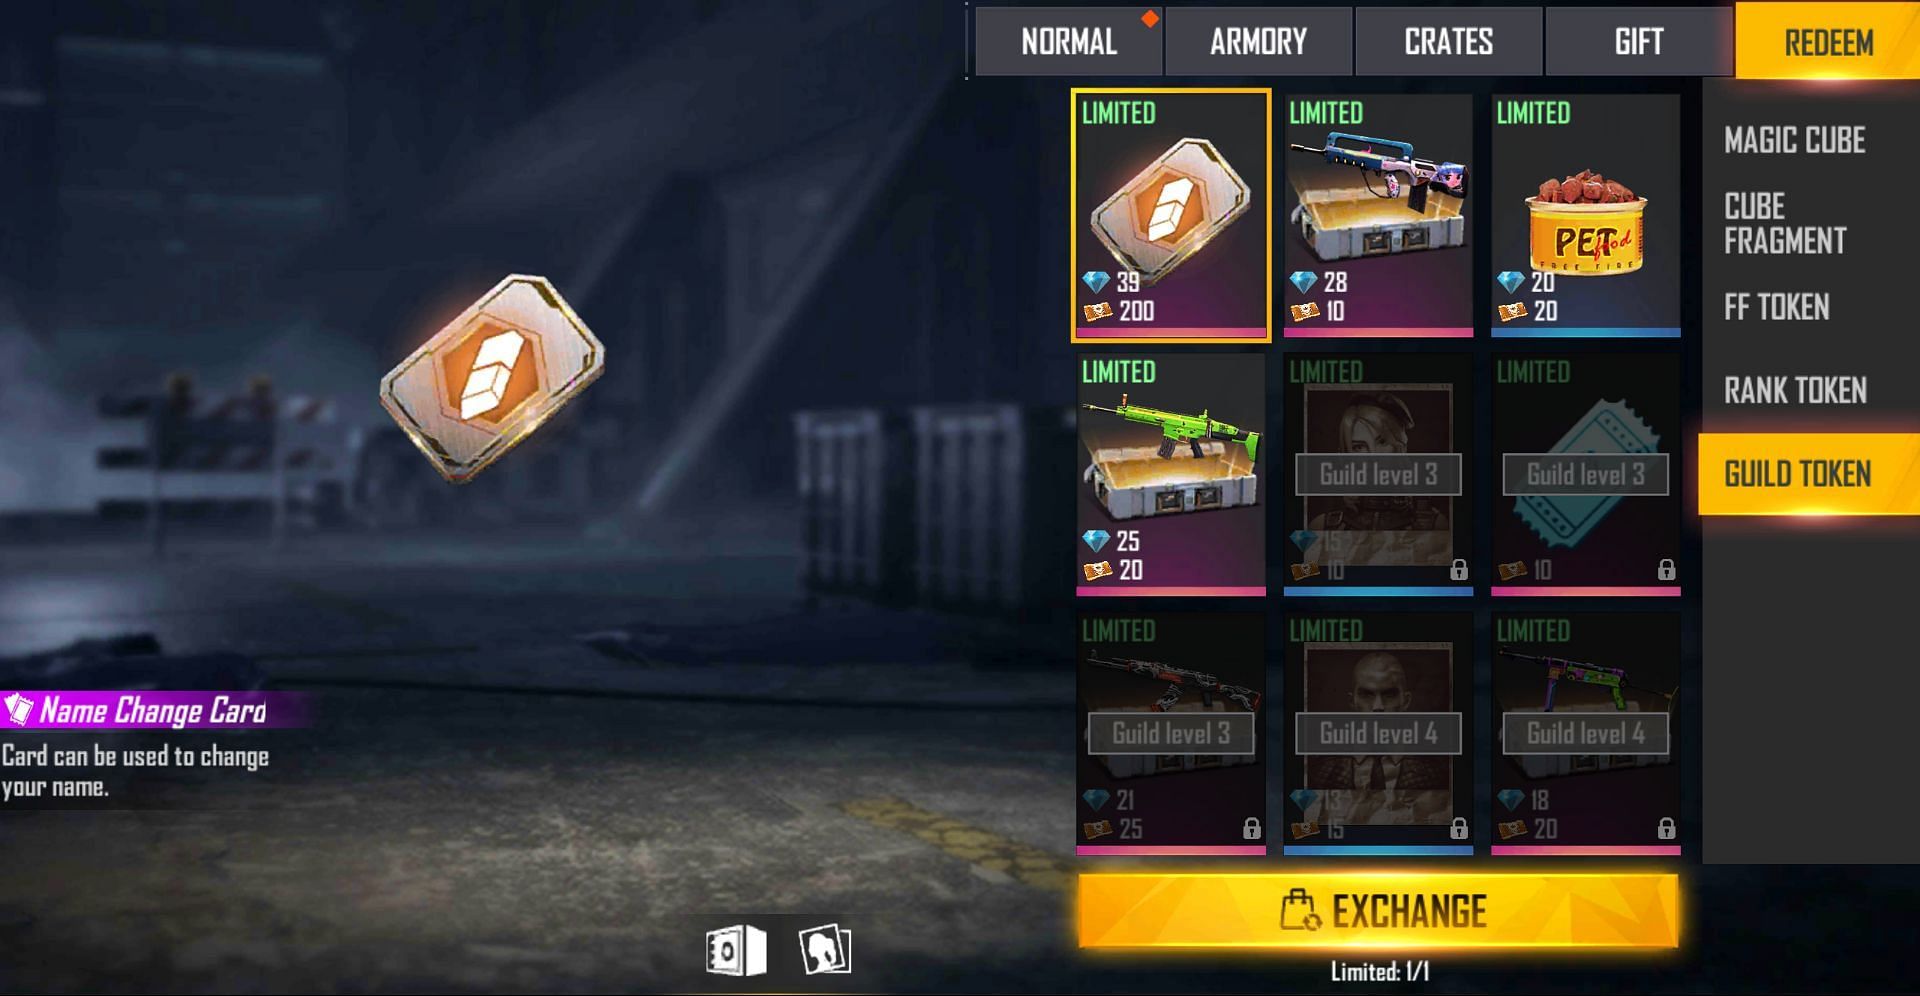 The card can be exchanged for 39 diamonds + 200 guild tokens (Image via Free Fire)